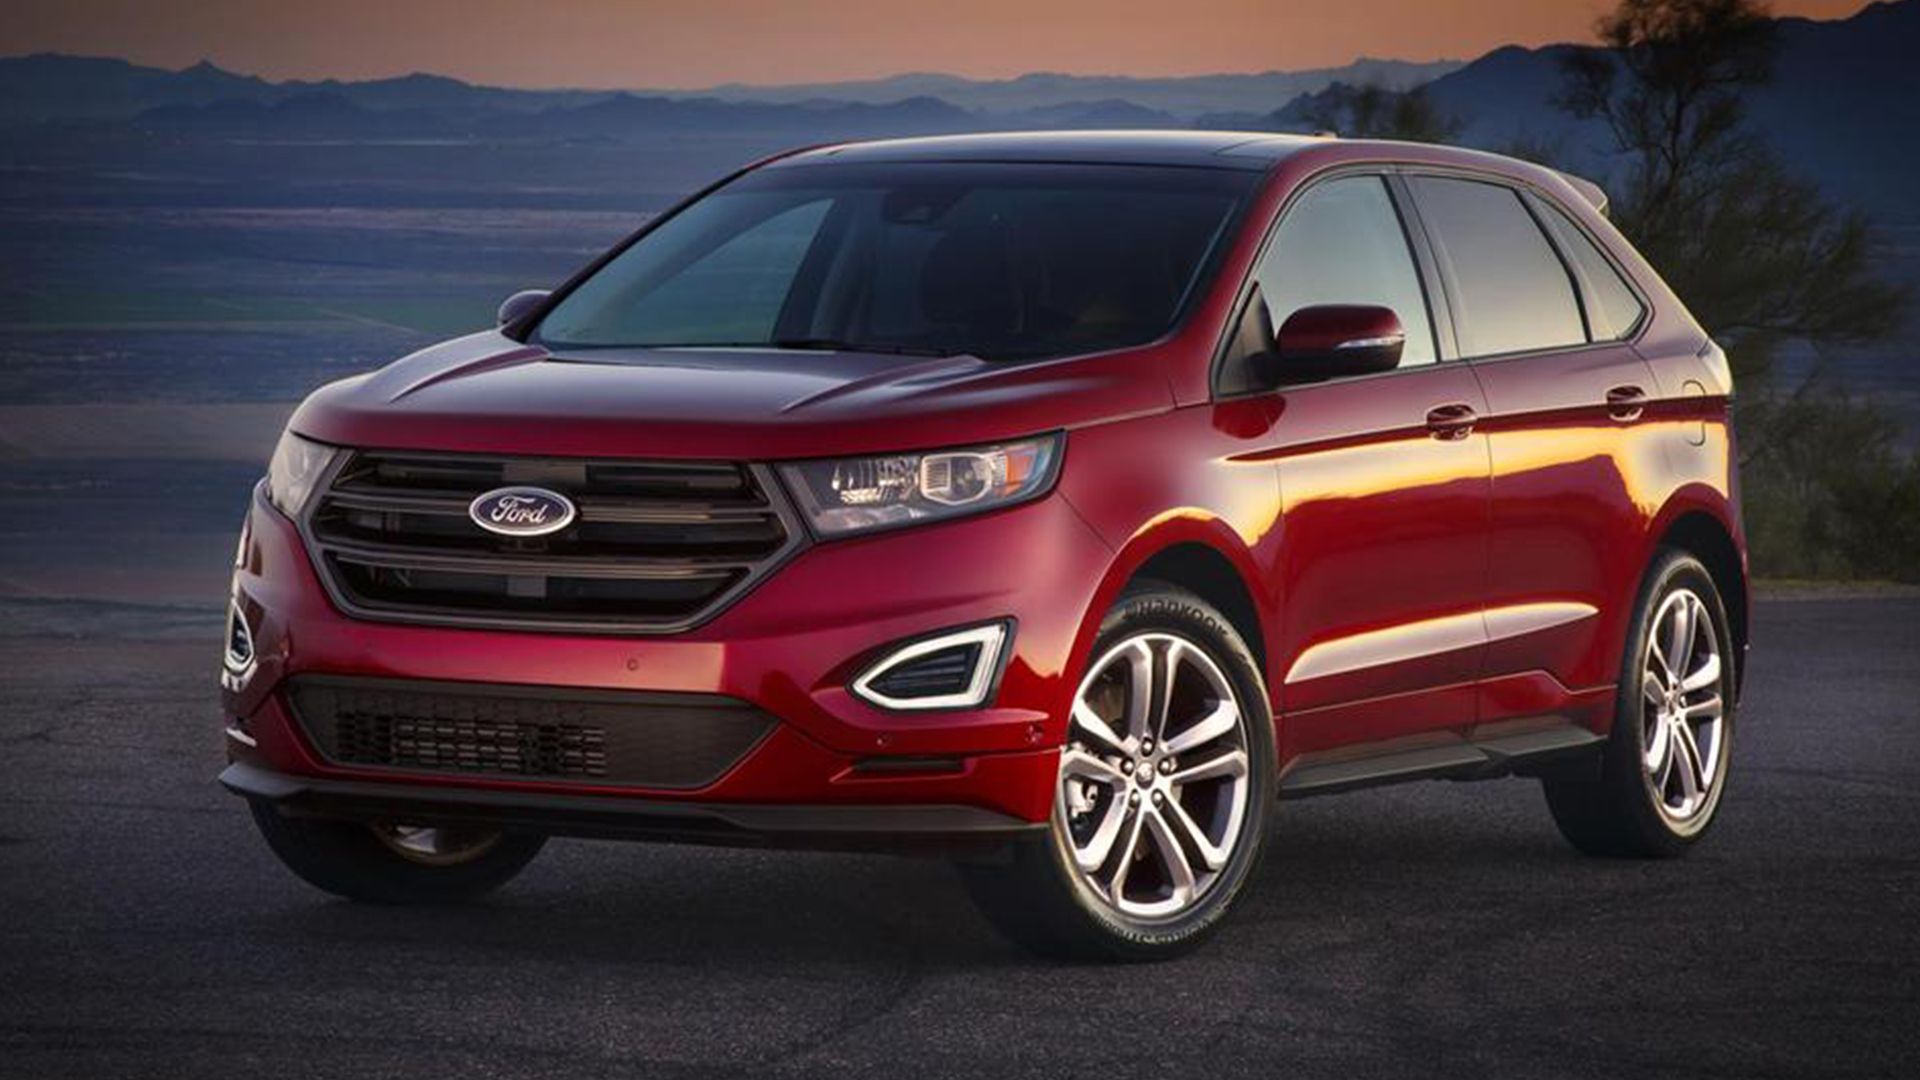 Exterior photo of Ford Edge 2015